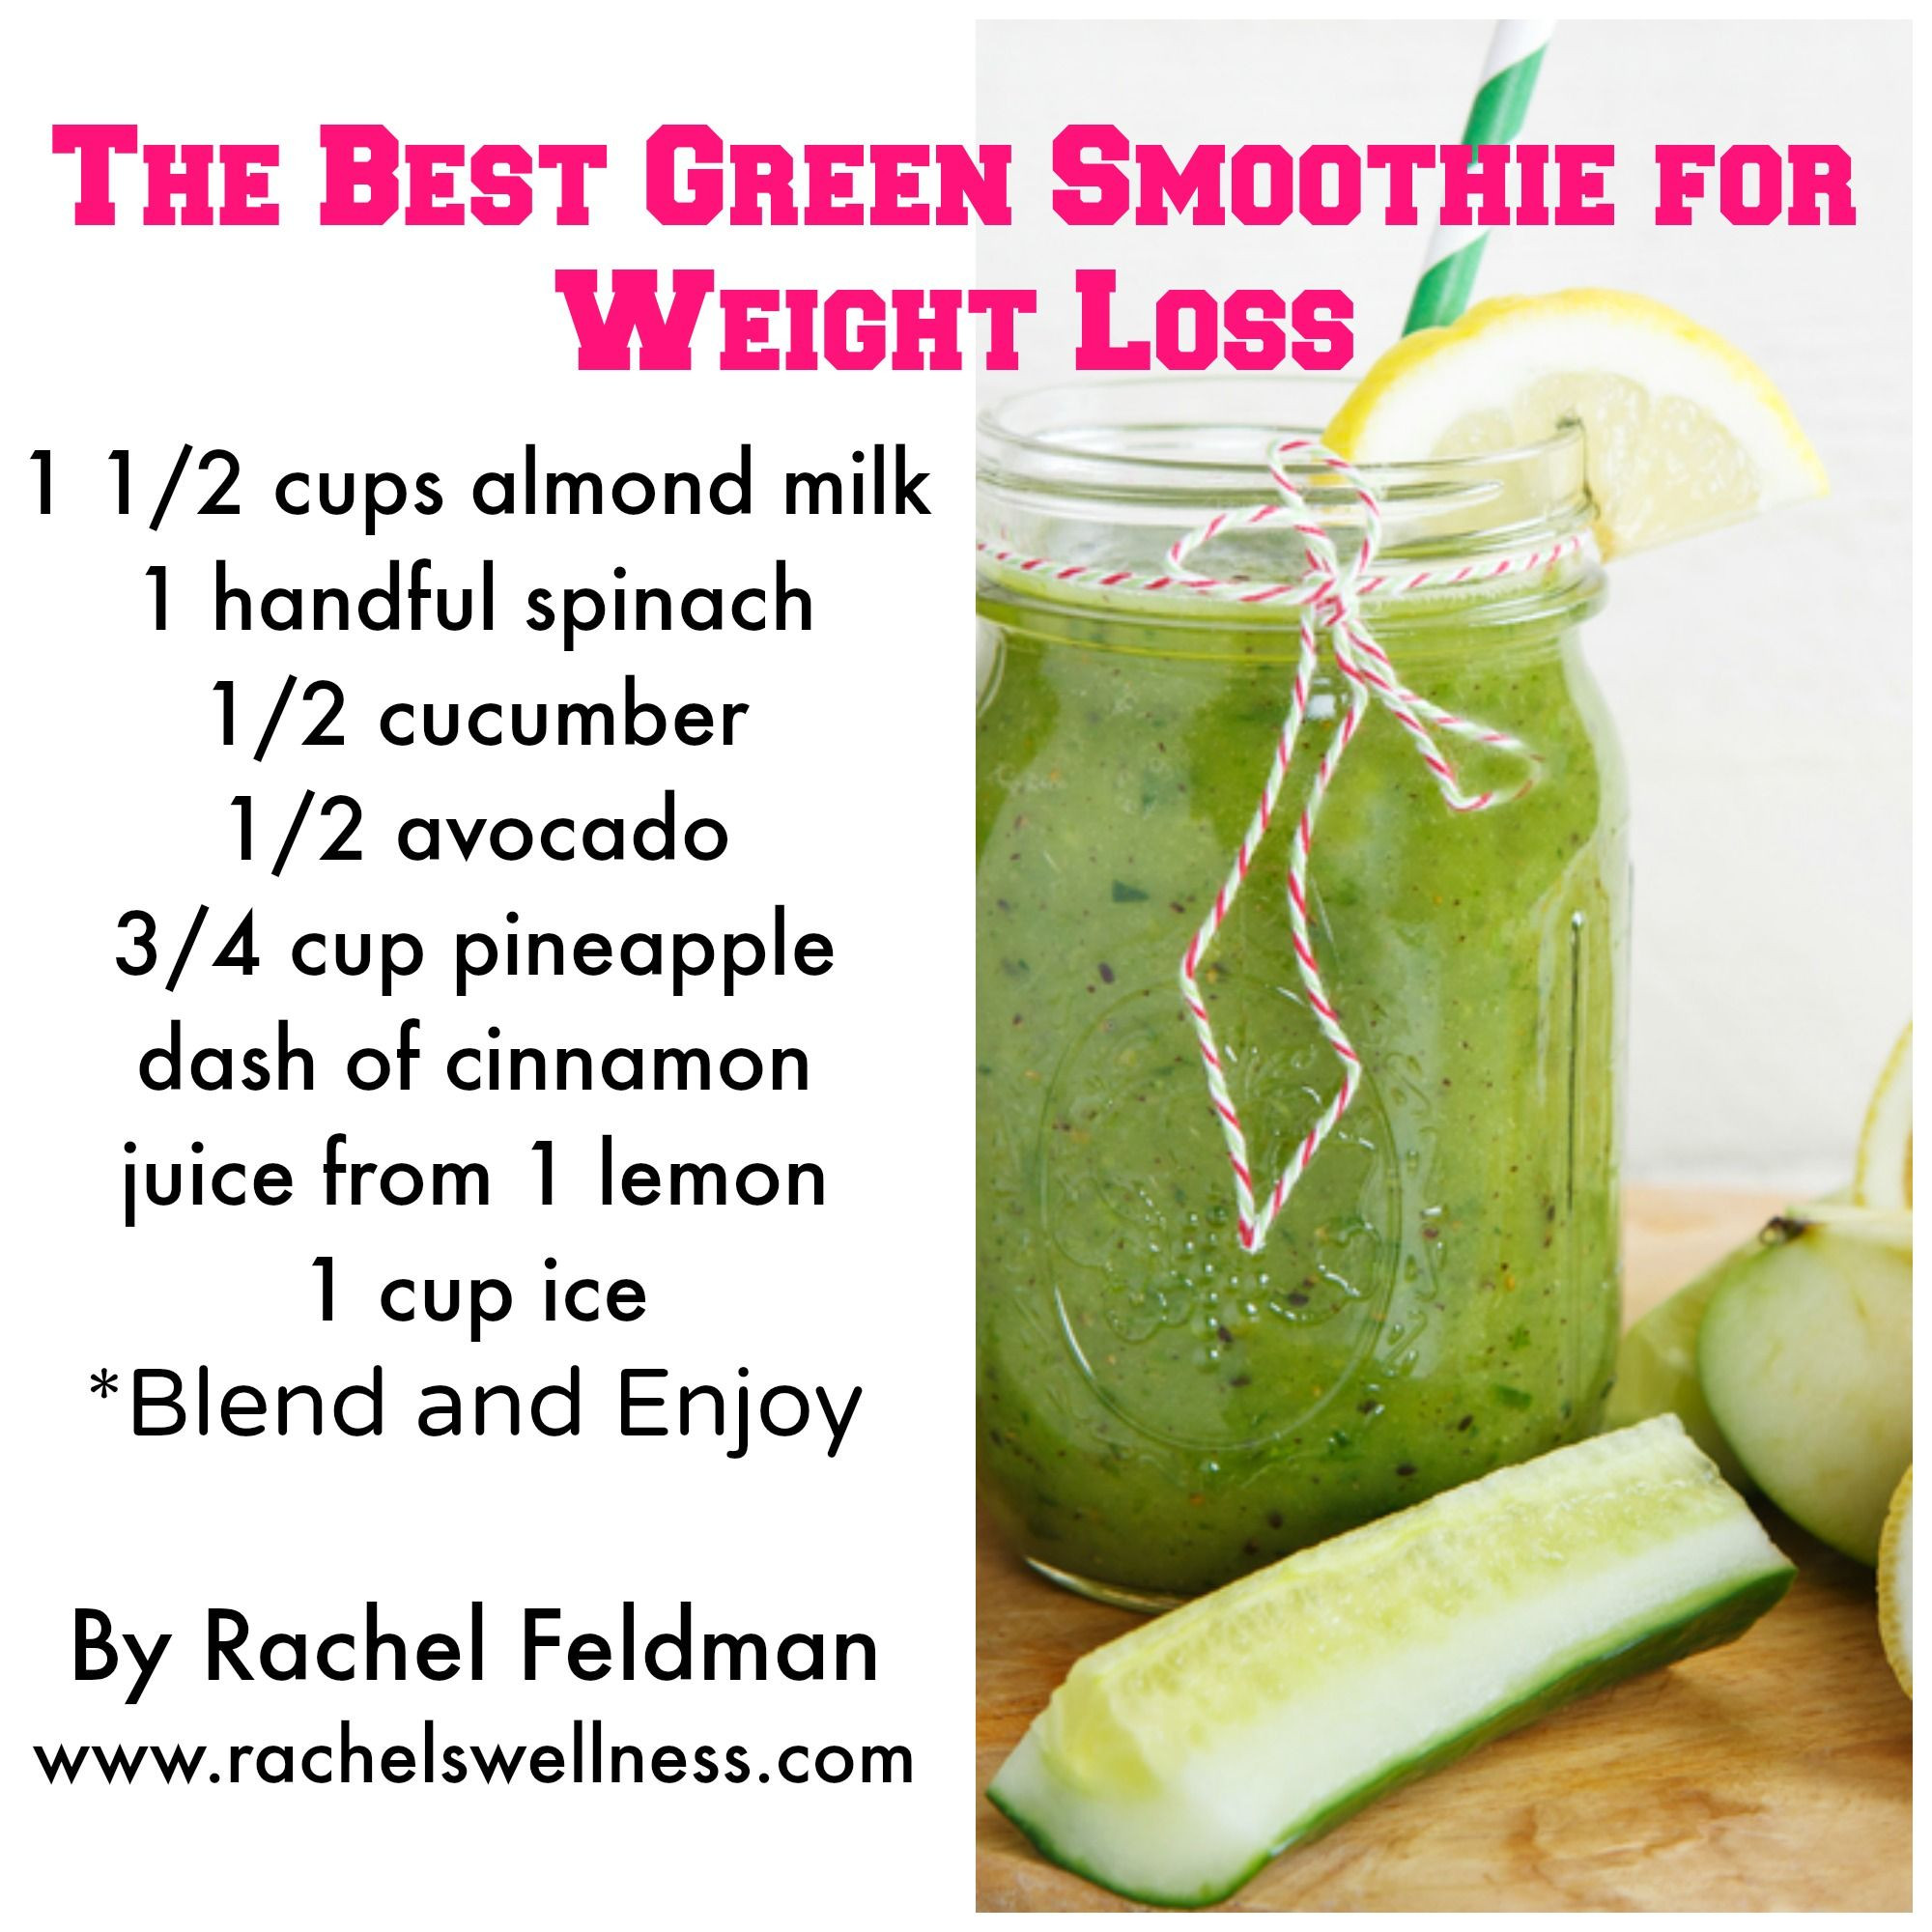 Best Morning Smoothies For Weight Loss
 7 Healthy Green Smoothie Recipes For Weight Loss